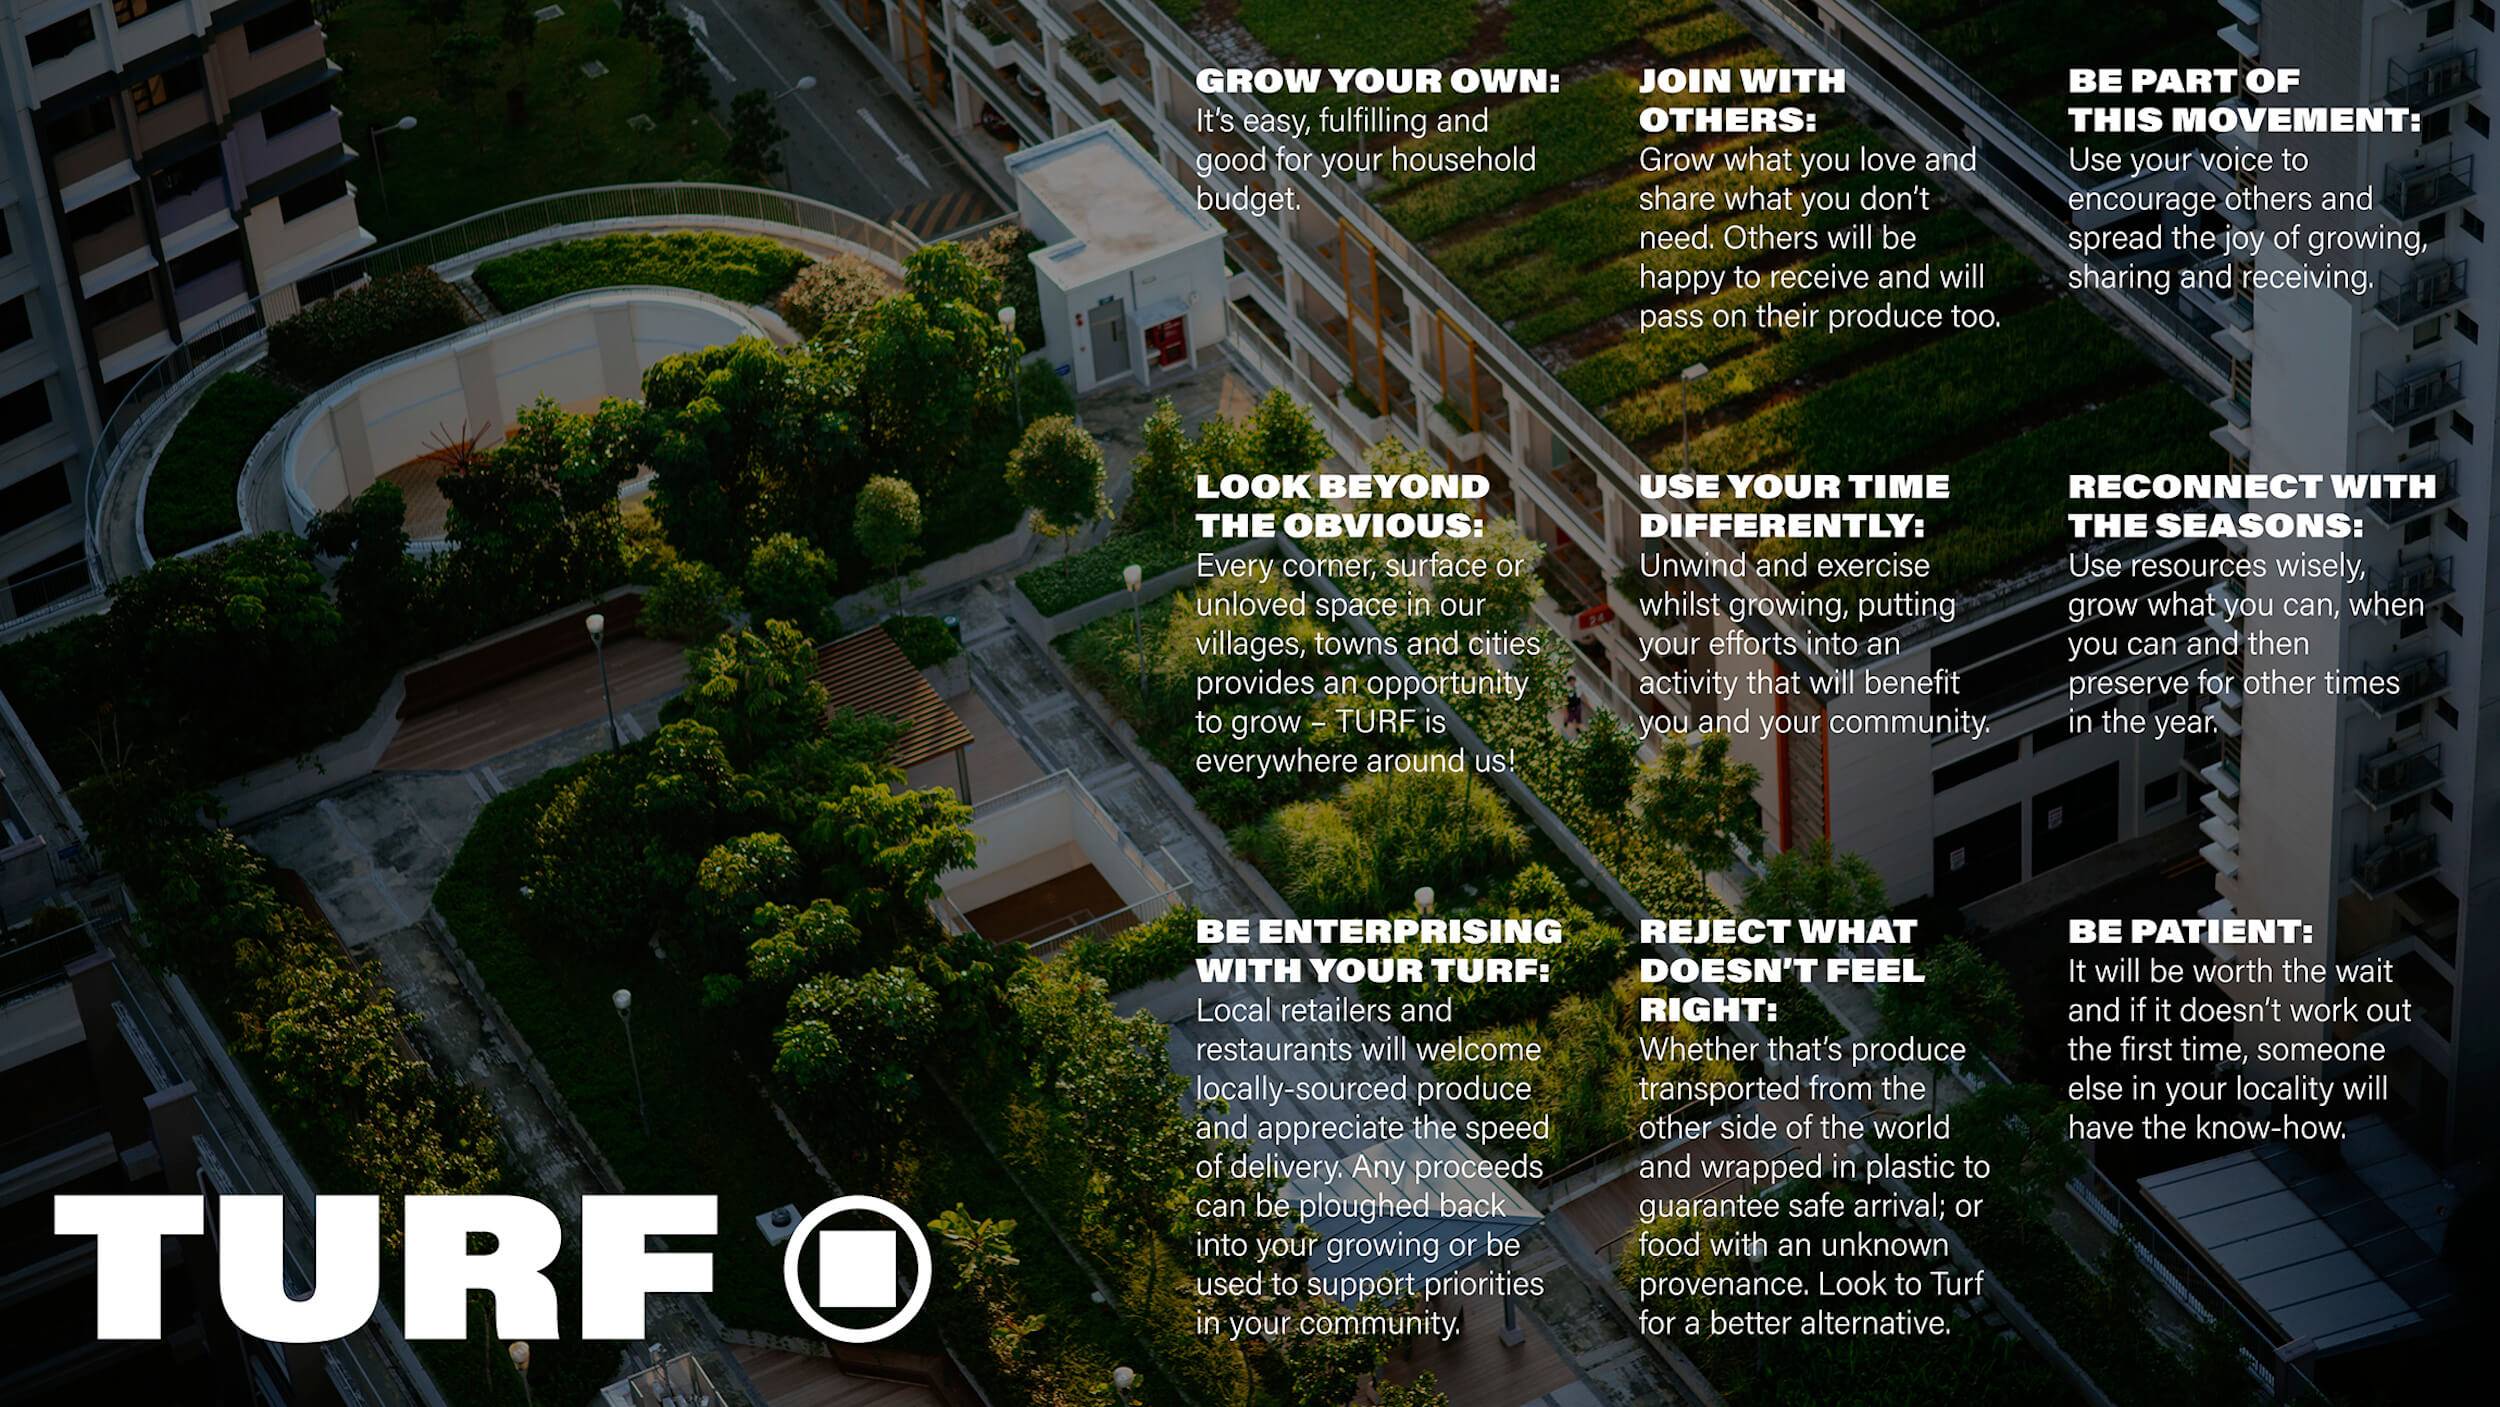 TURF manifesto over an image of a rooftop covered in plant beds